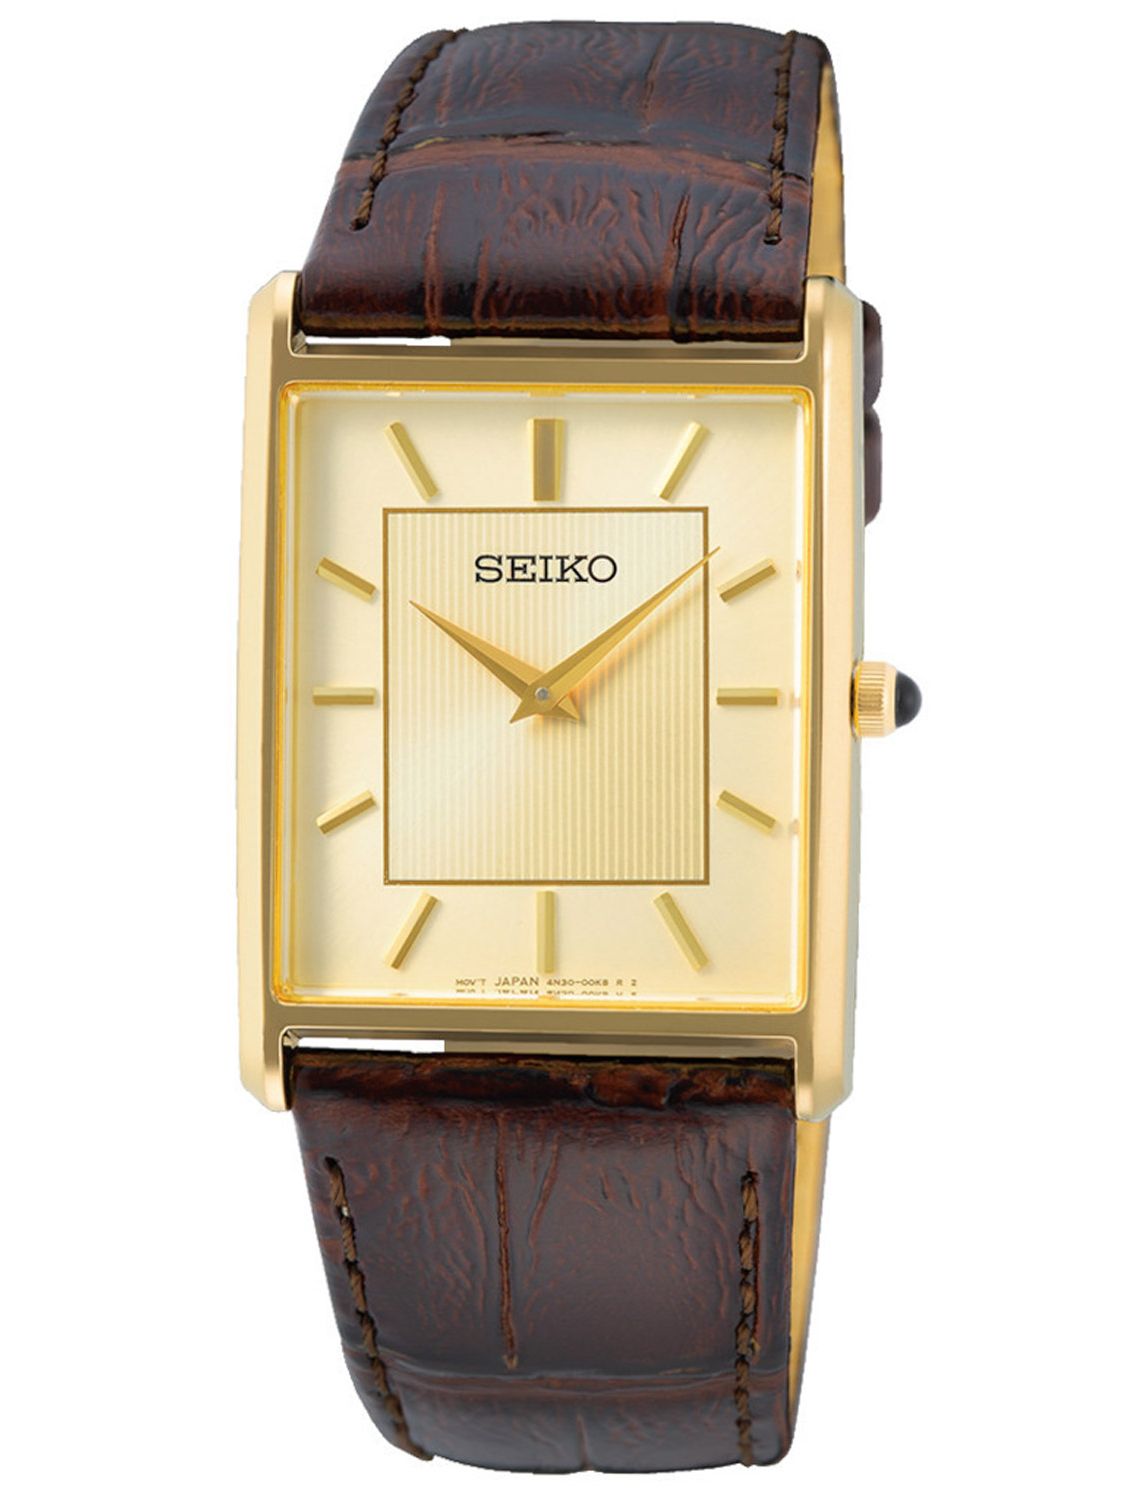 Seiko Men's Watch with Leather Strap Brown/Gold Tone SWR064P1 • uhrcenter